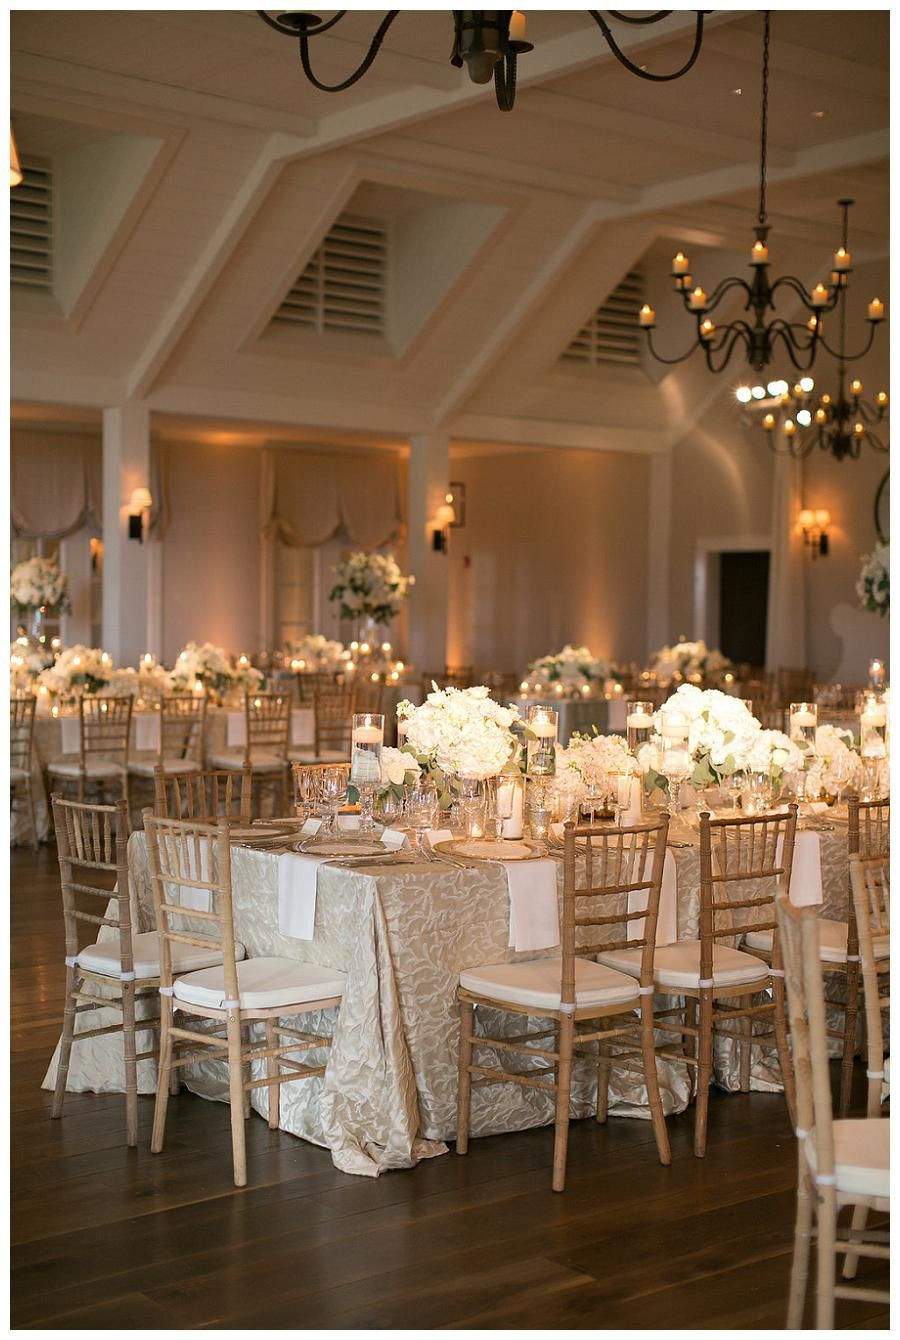 Gold And White Wedding Decor
 Gold ivory and white wedding reception decor with white